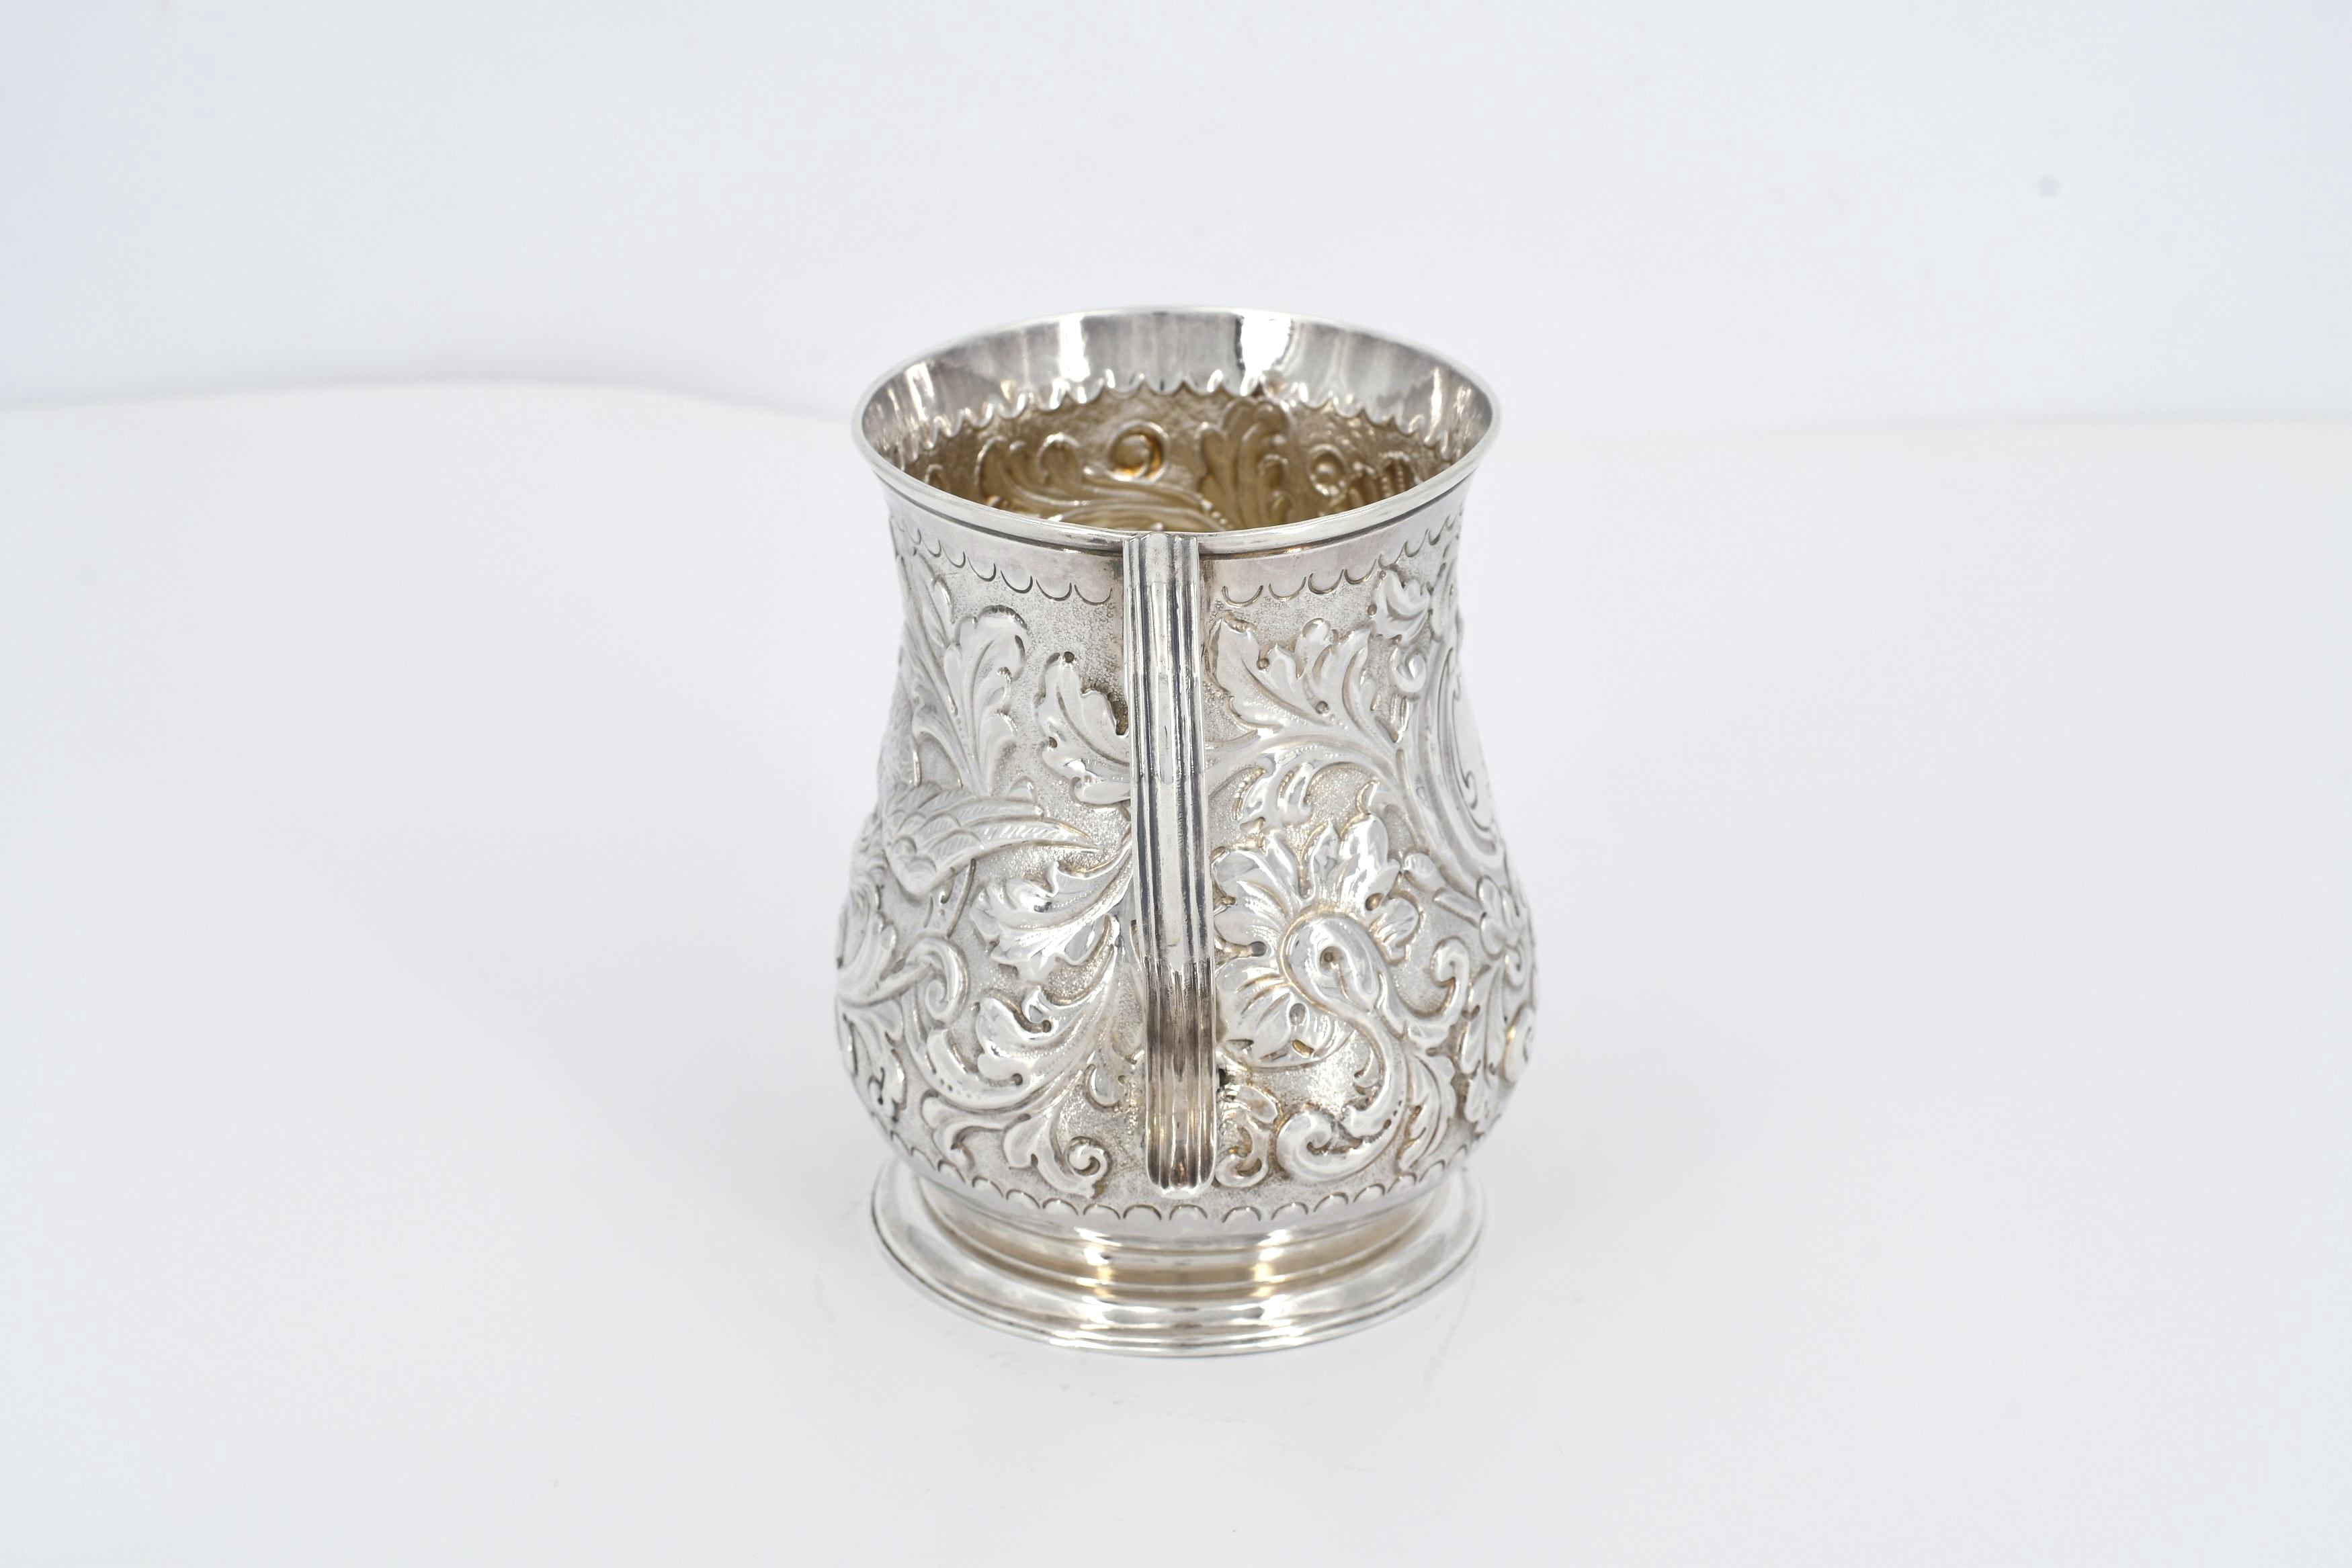 Silver salt dish and small George II mug with relief décor - Image 6 of 10